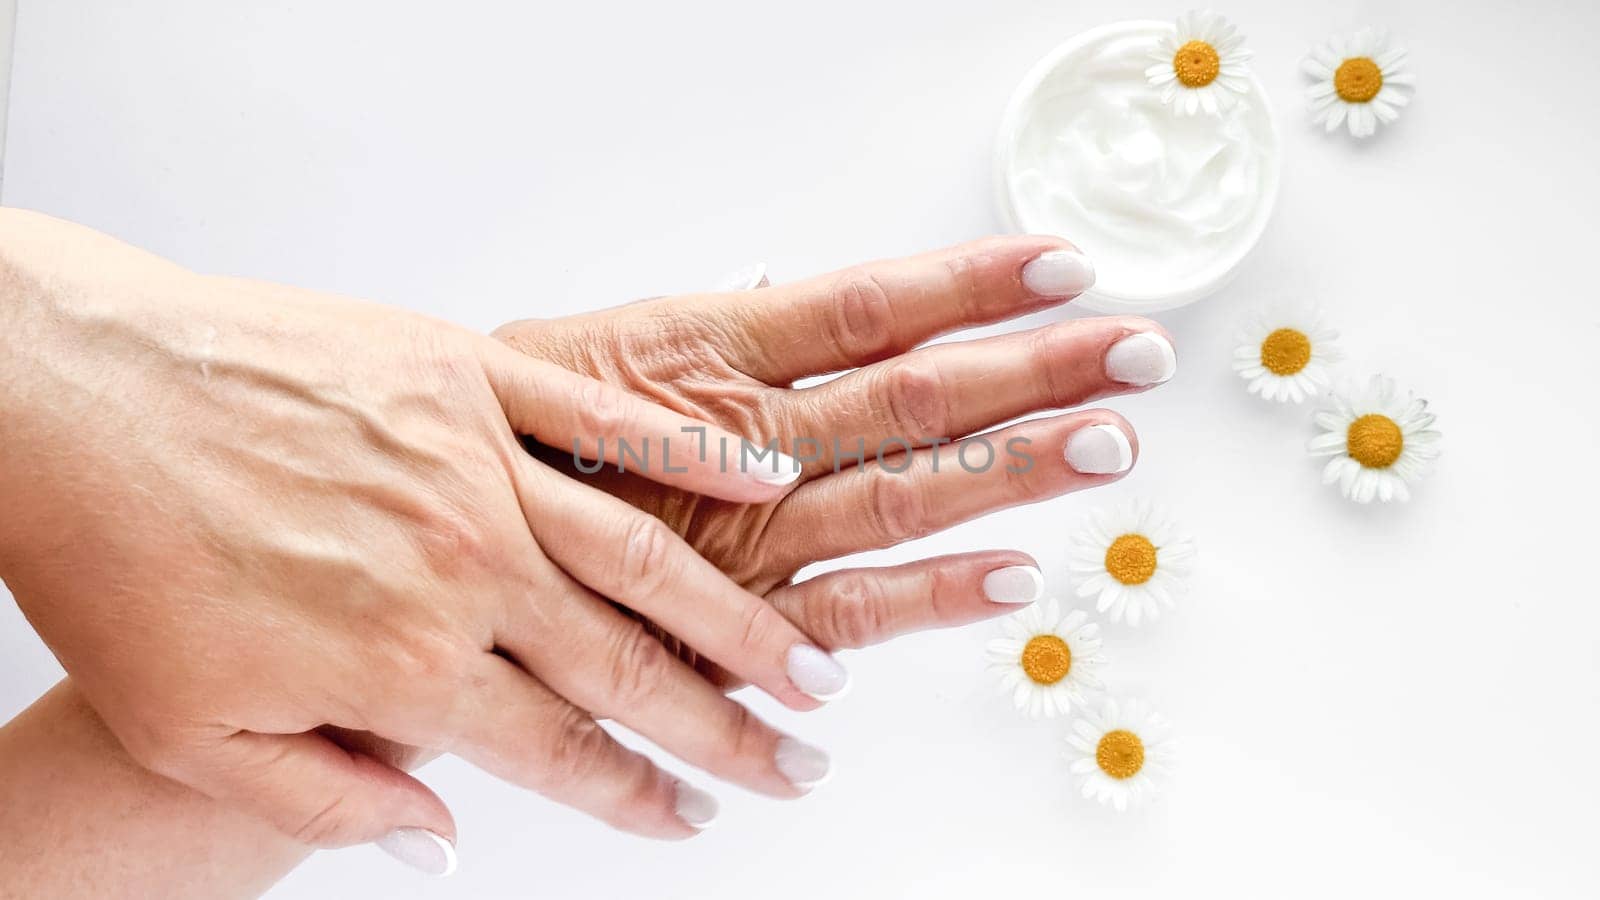 Close up of middle age woman hands applying cream with chamomile flowers and hand cream container on white background. Skincare and natural beauty concept. For healthcare, wellness, organic product.